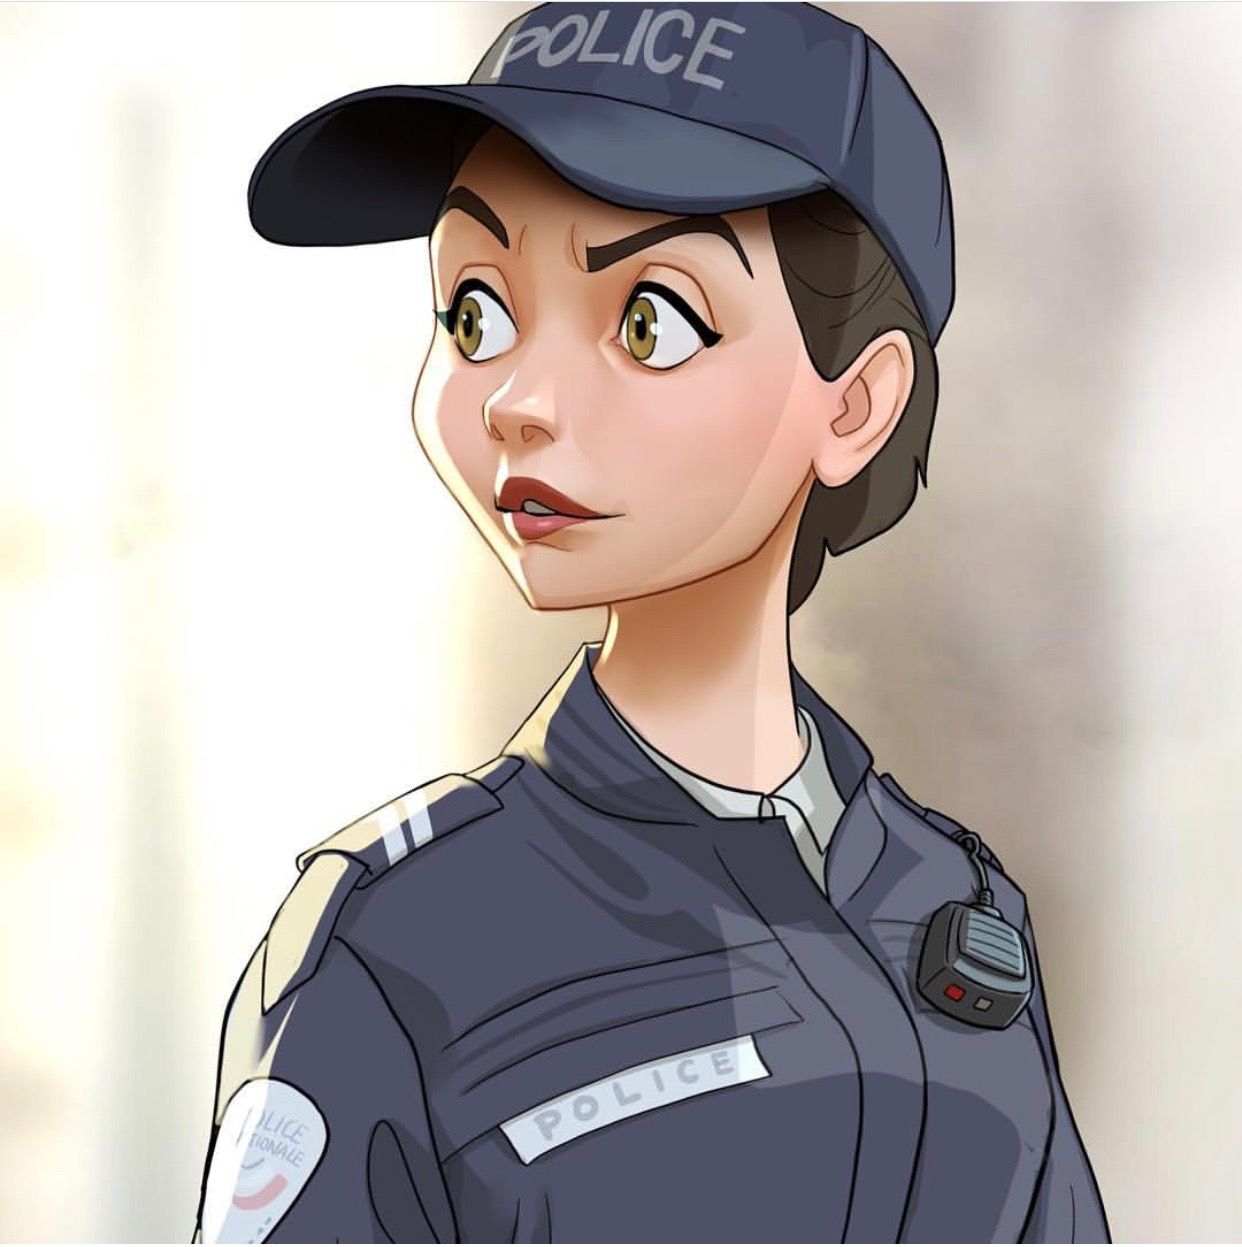 Future police officer ideas. police, police officer, police life